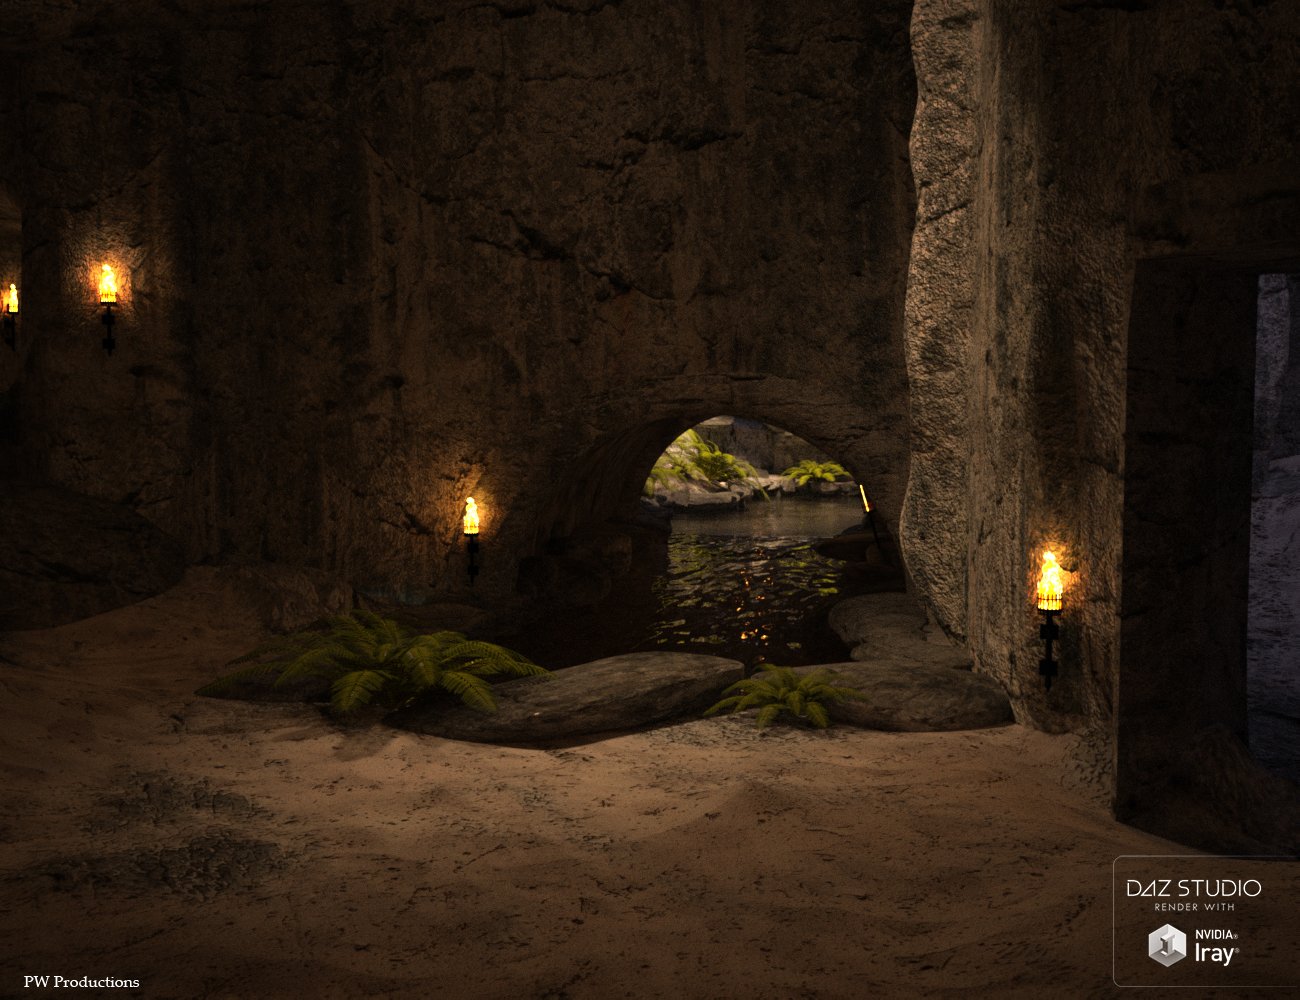 The Cave Island by: PW Productions, 3D Models by Daz 3D